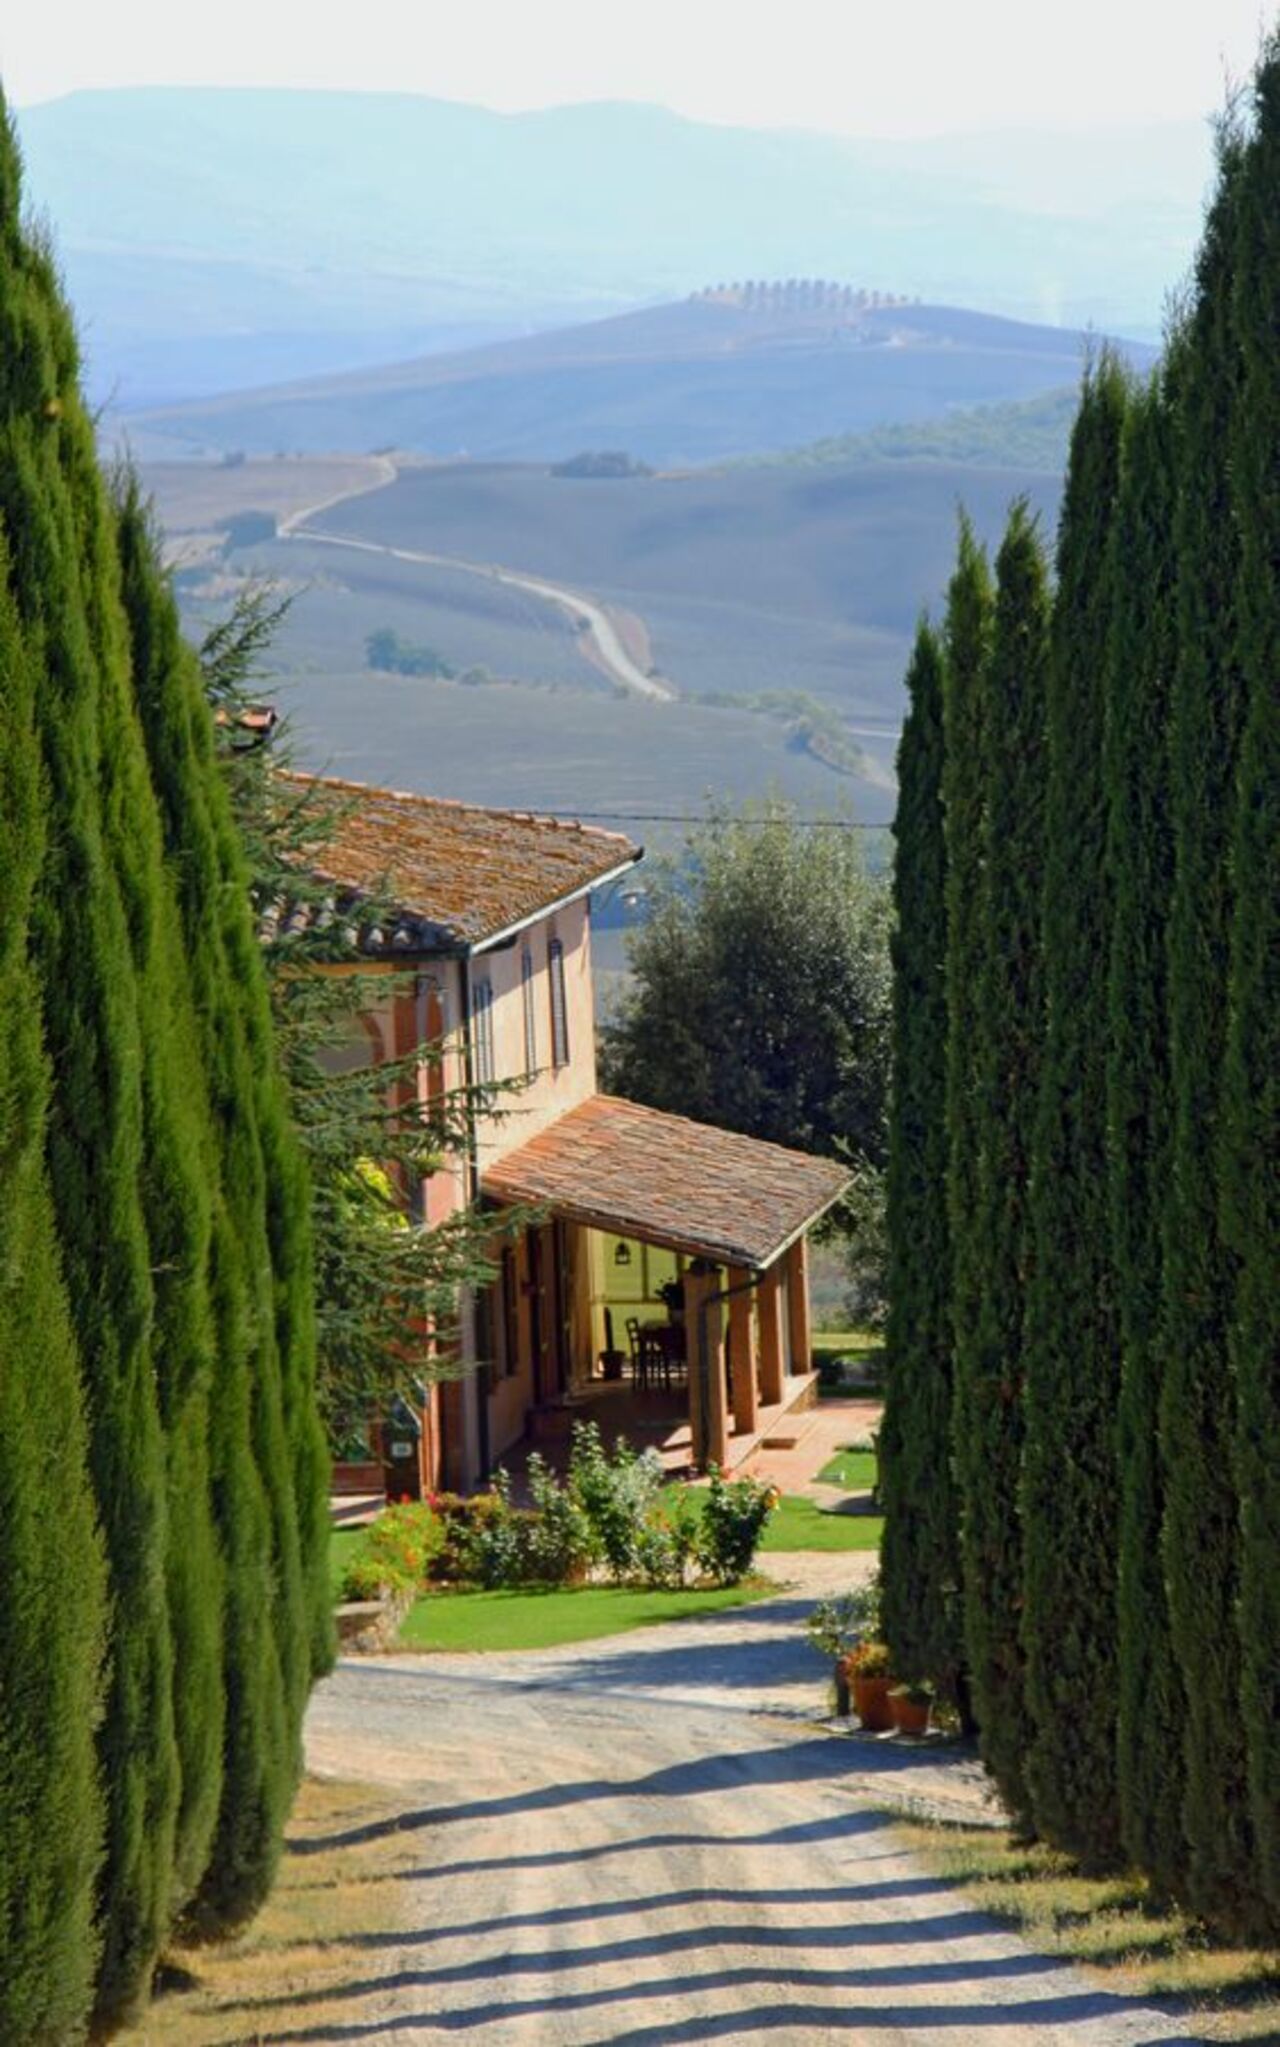 A cedar-lined approach to this farmhouse in #Tuscany's Val d'Orcia: https://t.co/iHct72grWS